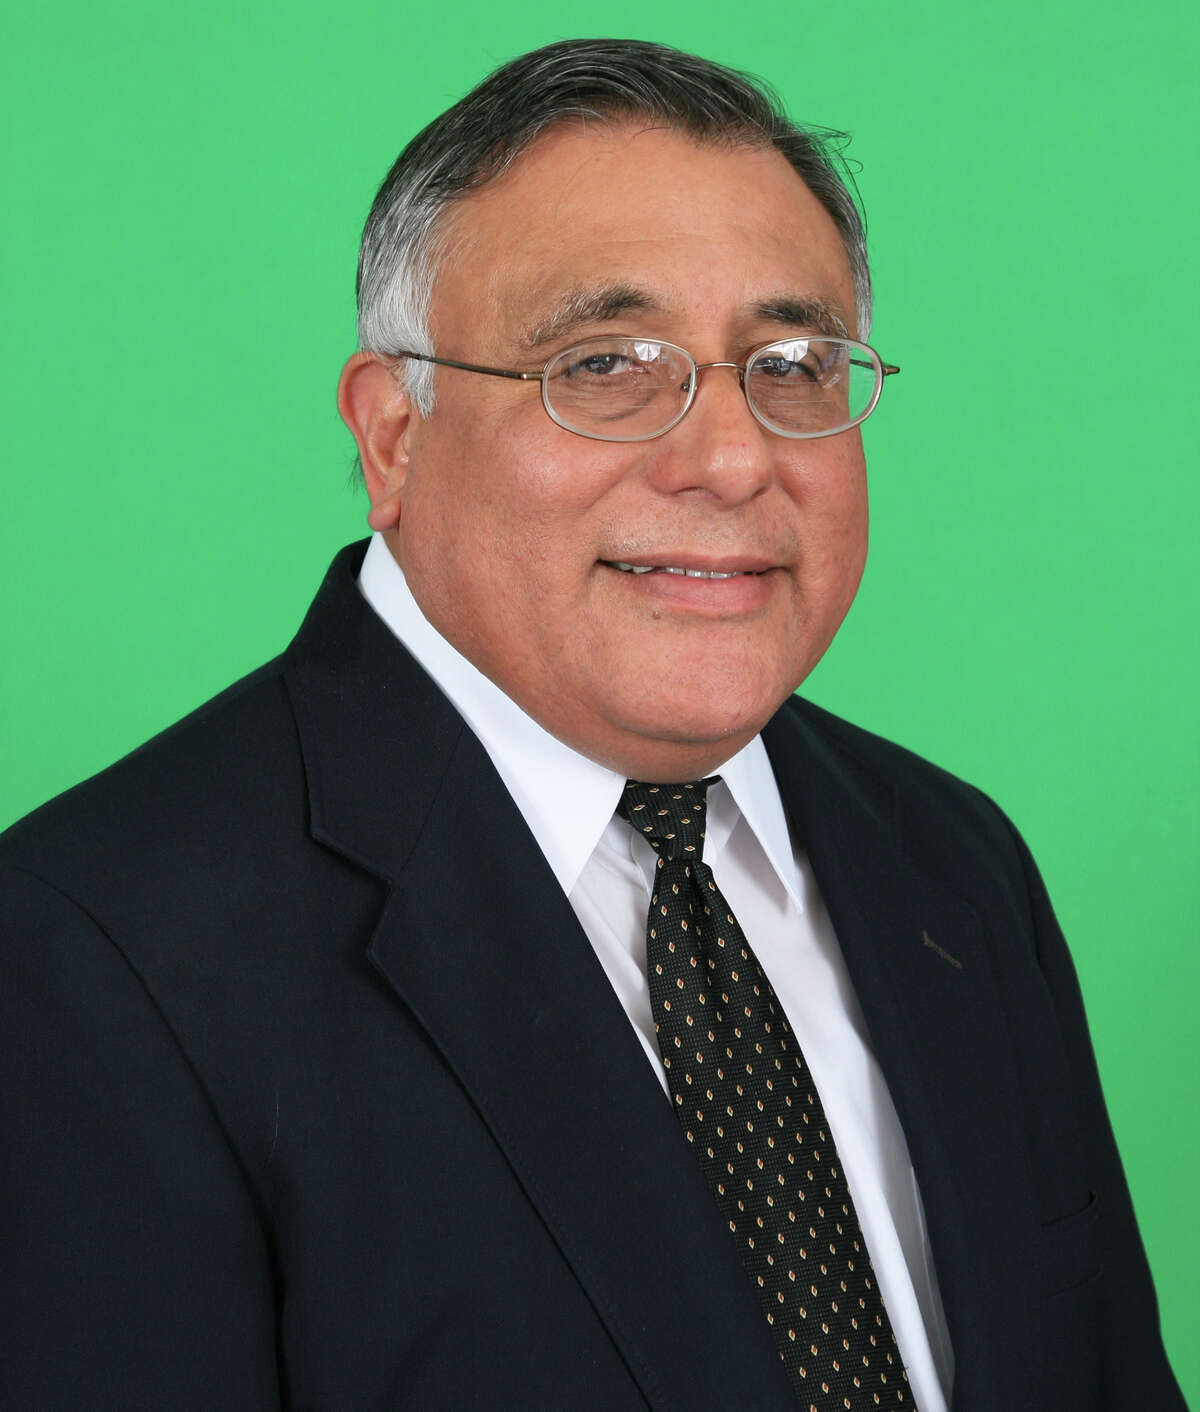 George Rodriguez: Retired from working for Republican administrations.